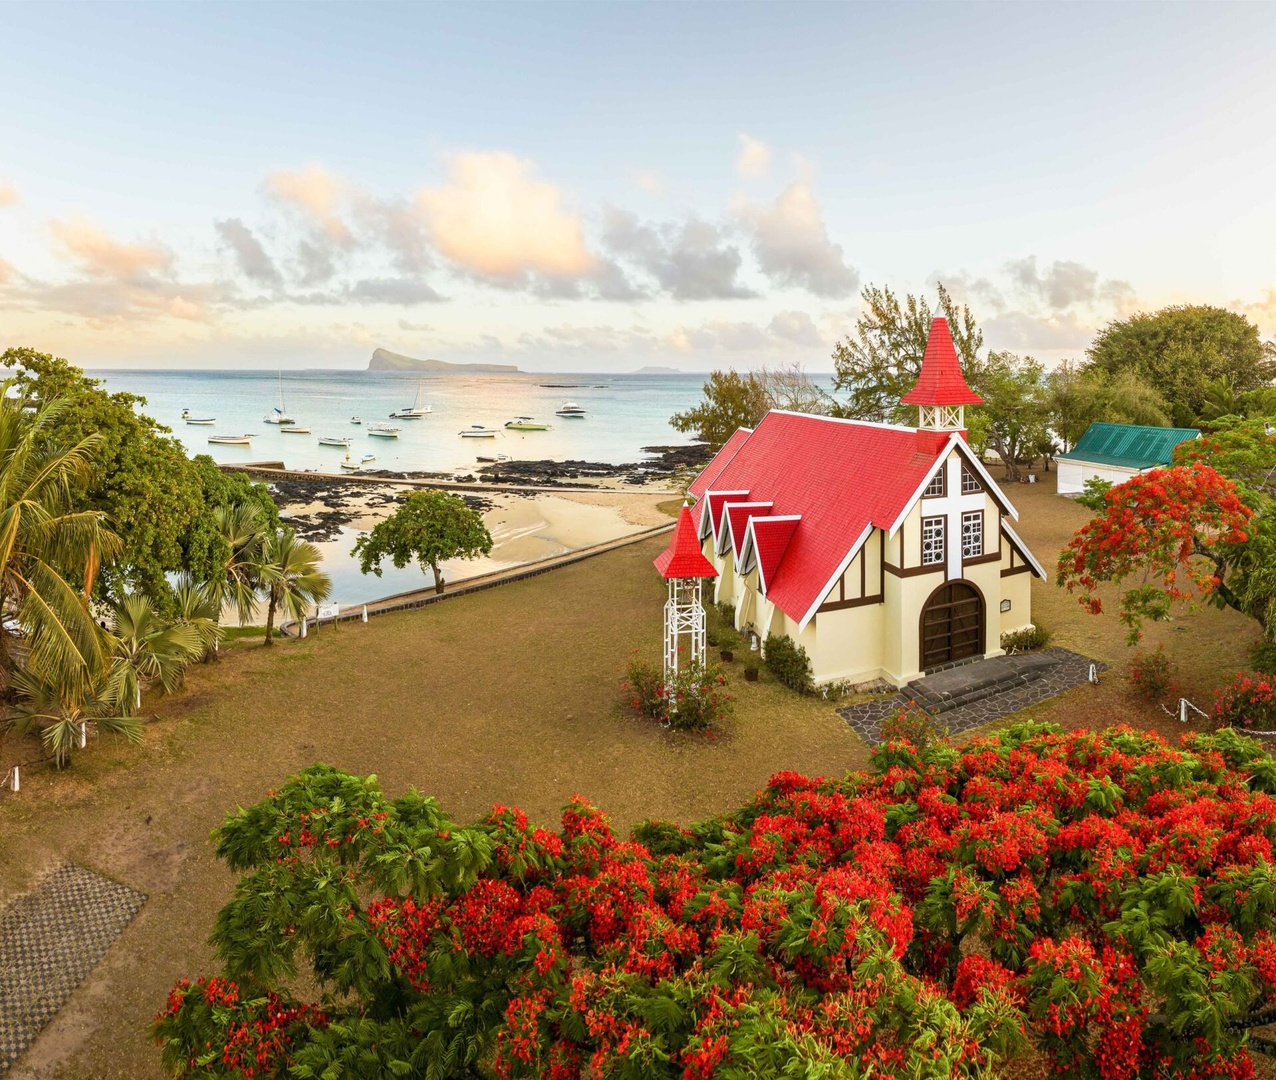 Discover the Mauritian lifestyle with Mauritius Sotheby's International Realty.